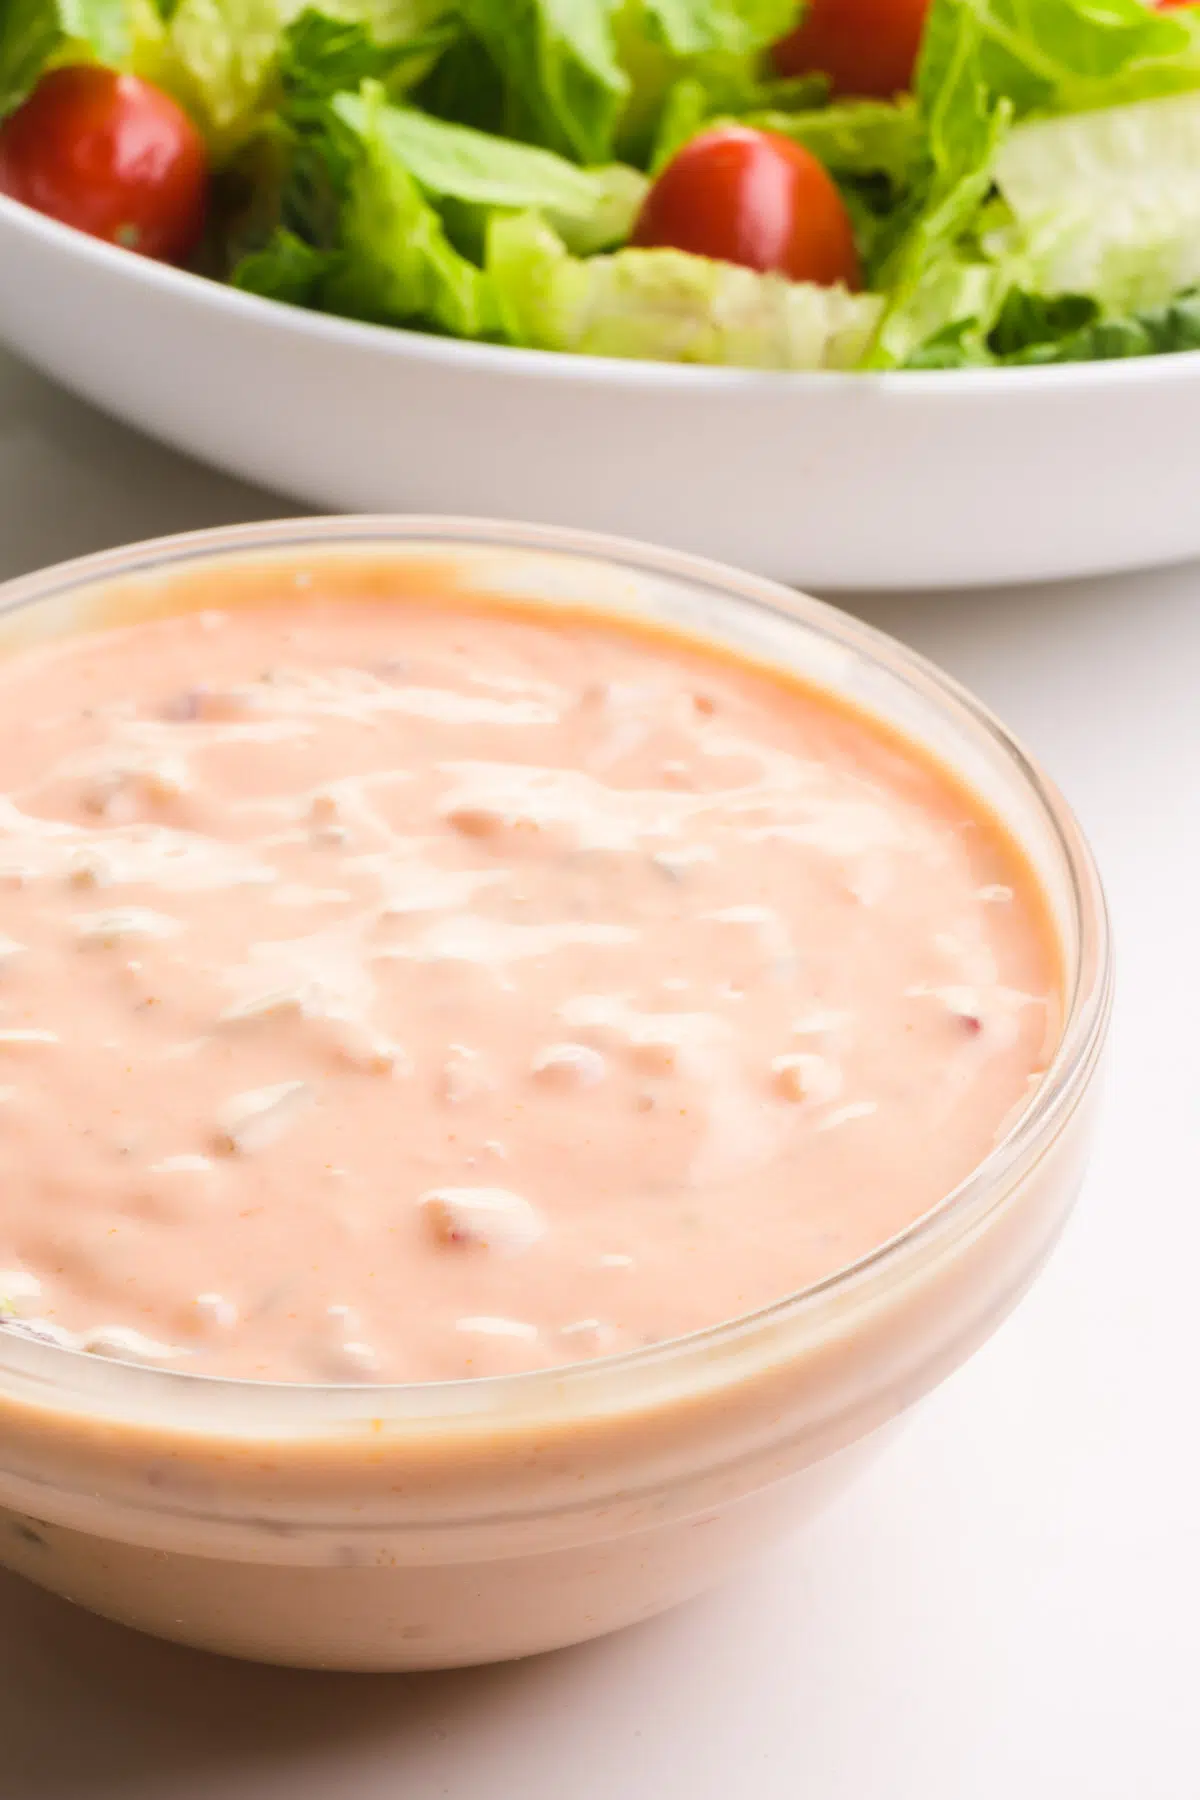 A bowl is full of Thousand Island Dressing and sits in front of a salad with greens and cherry tomatoes.